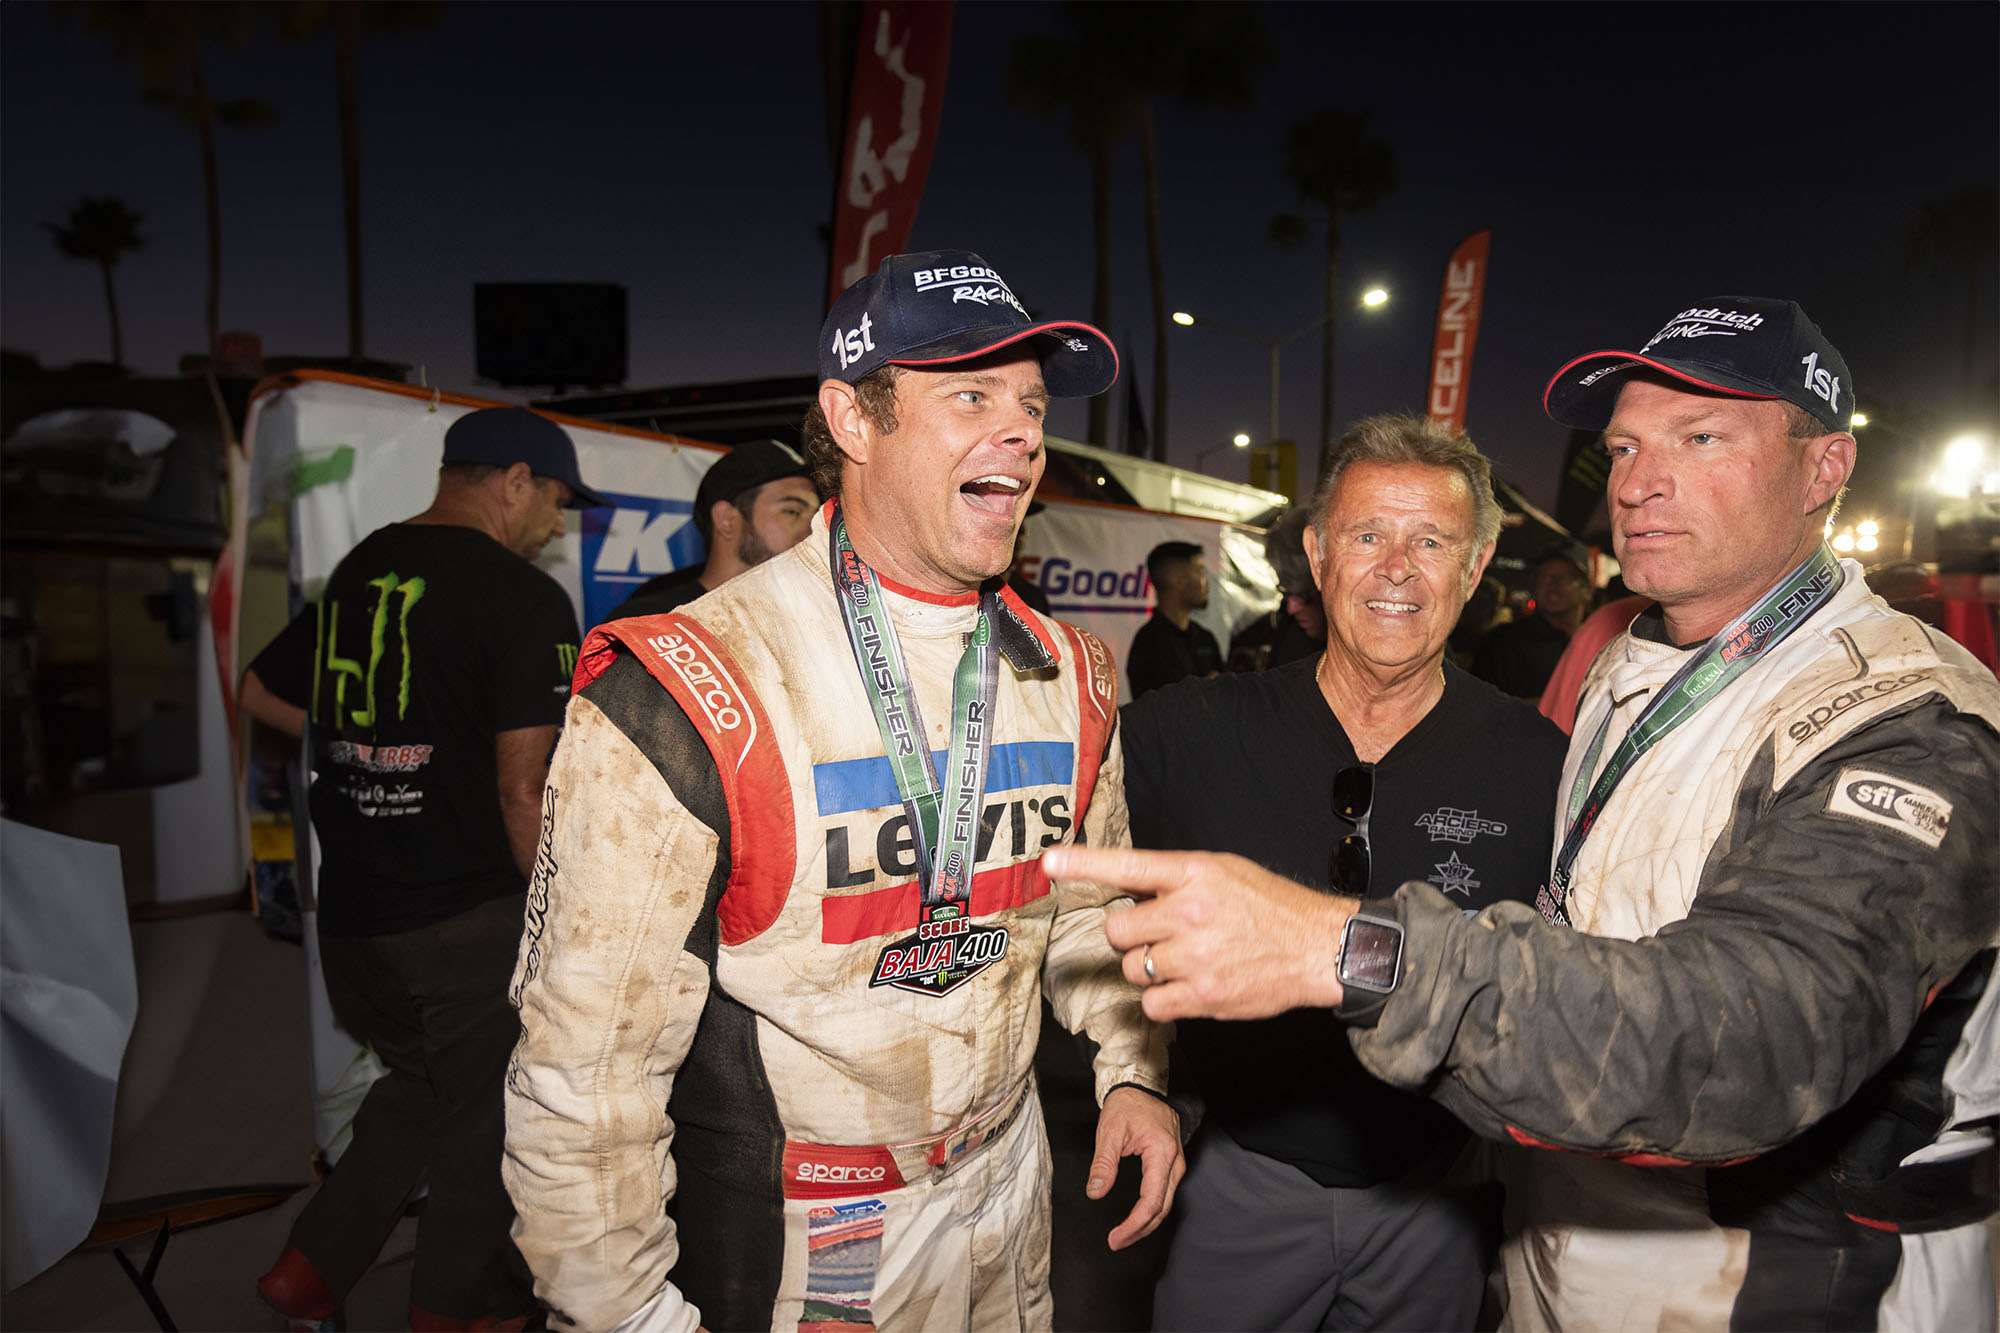 Ryan Arciero squeezes out overall & SCORE Trophy Truck win at Inaugural SCORE Baja 400